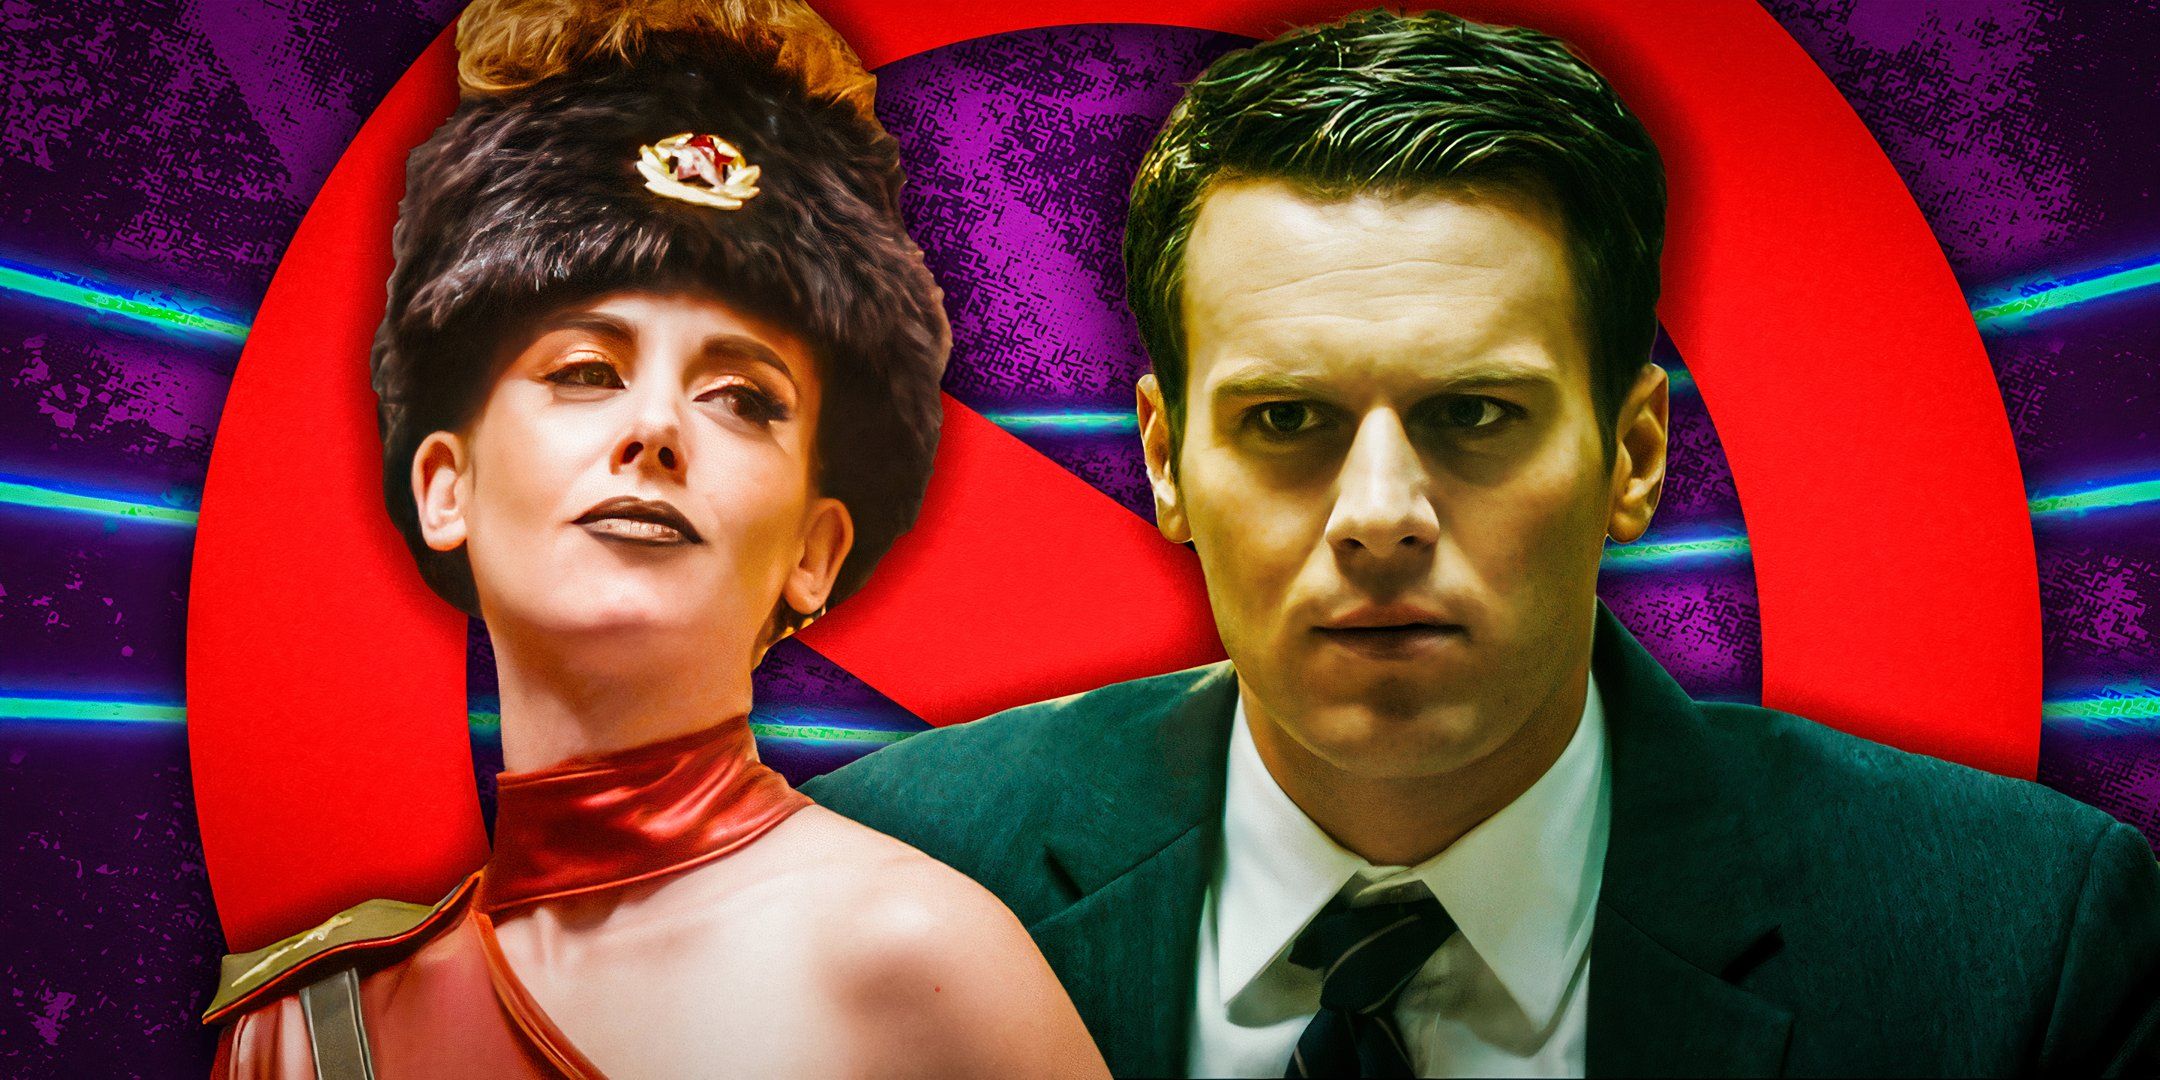 Alison Brie as Ruth Wilder from Glow and Jonathan Groff as Holden Ford from Mindhunter